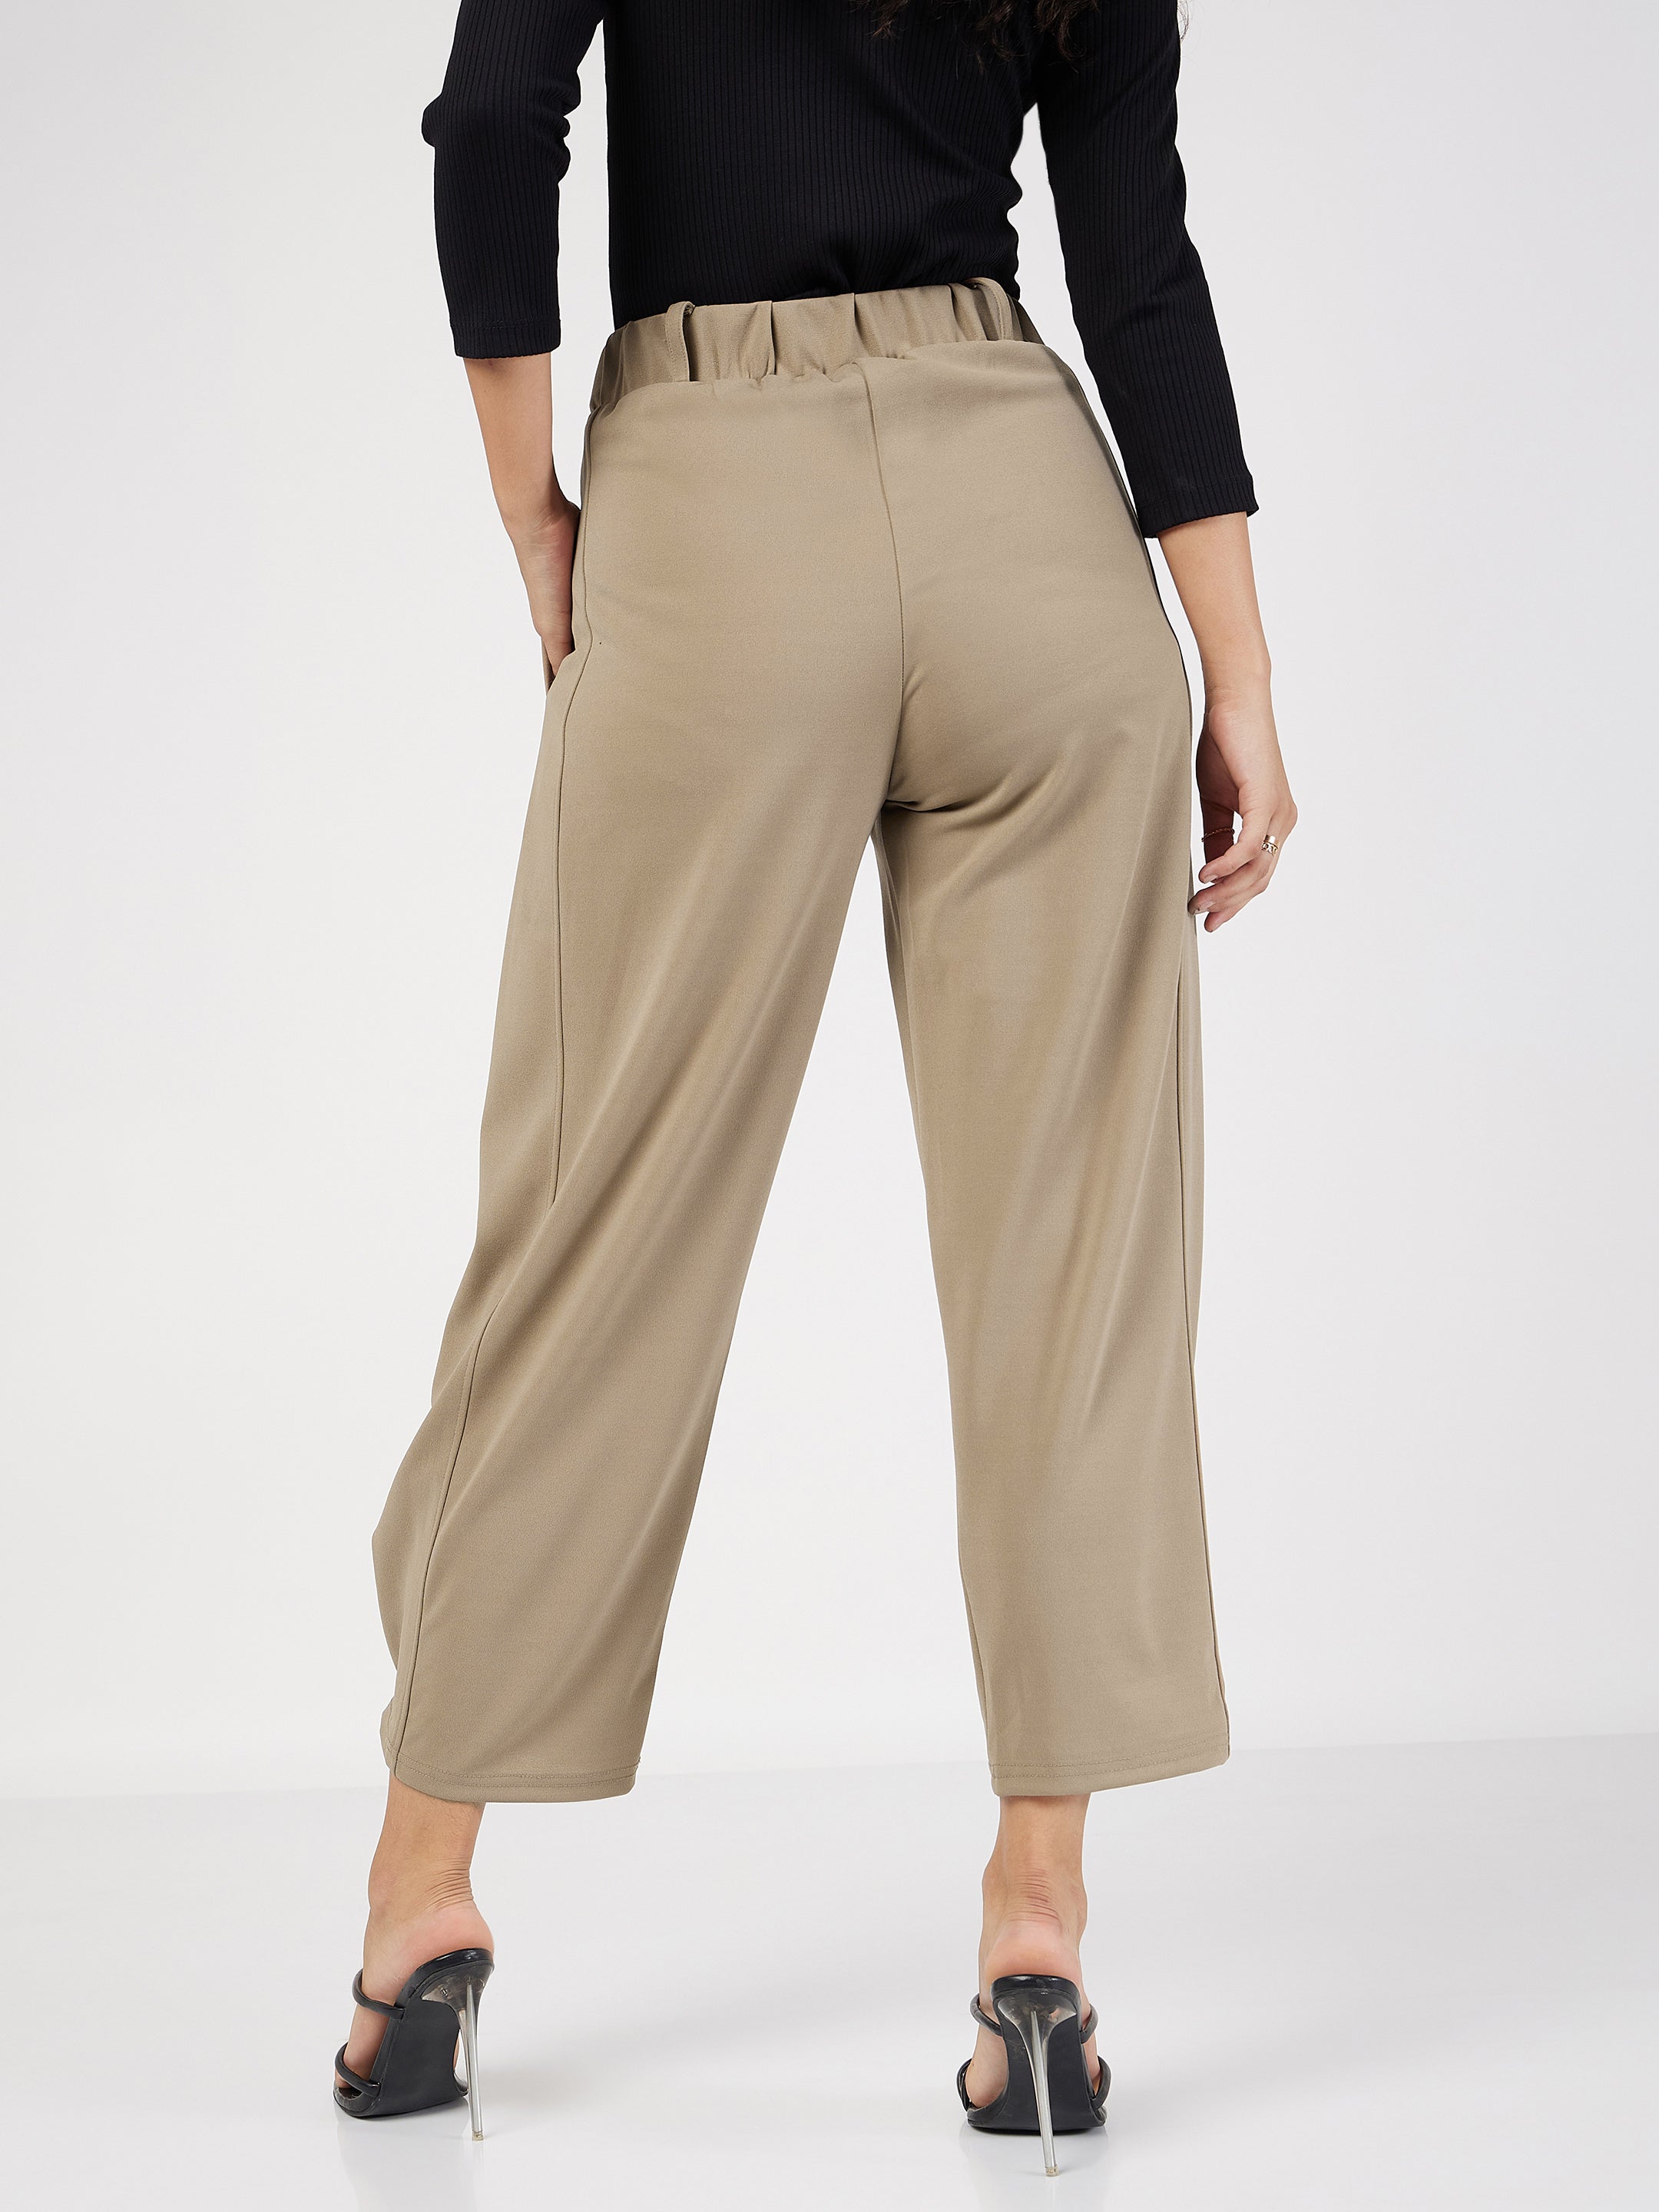 Gamiss Women Trouser Drop Bottom Harem Pants With Drawstring Casual Loose  Plus Size Full Length Pants Hippie Balloon Pants S 2XL From My01, $27.14 |  DHgate.Com